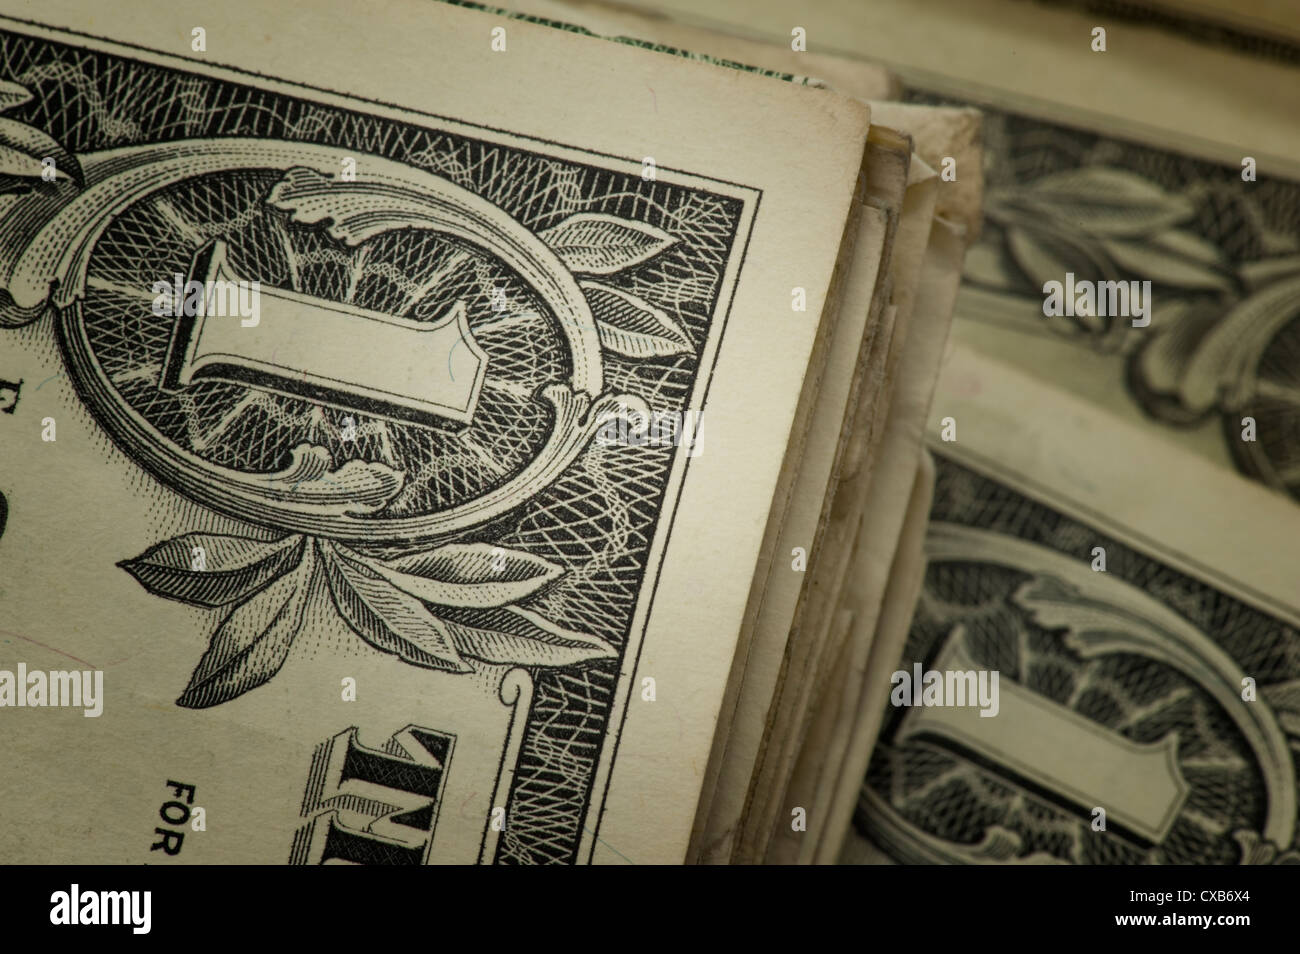 conceptual view of several one dollar bills US stacked together Stock Photo